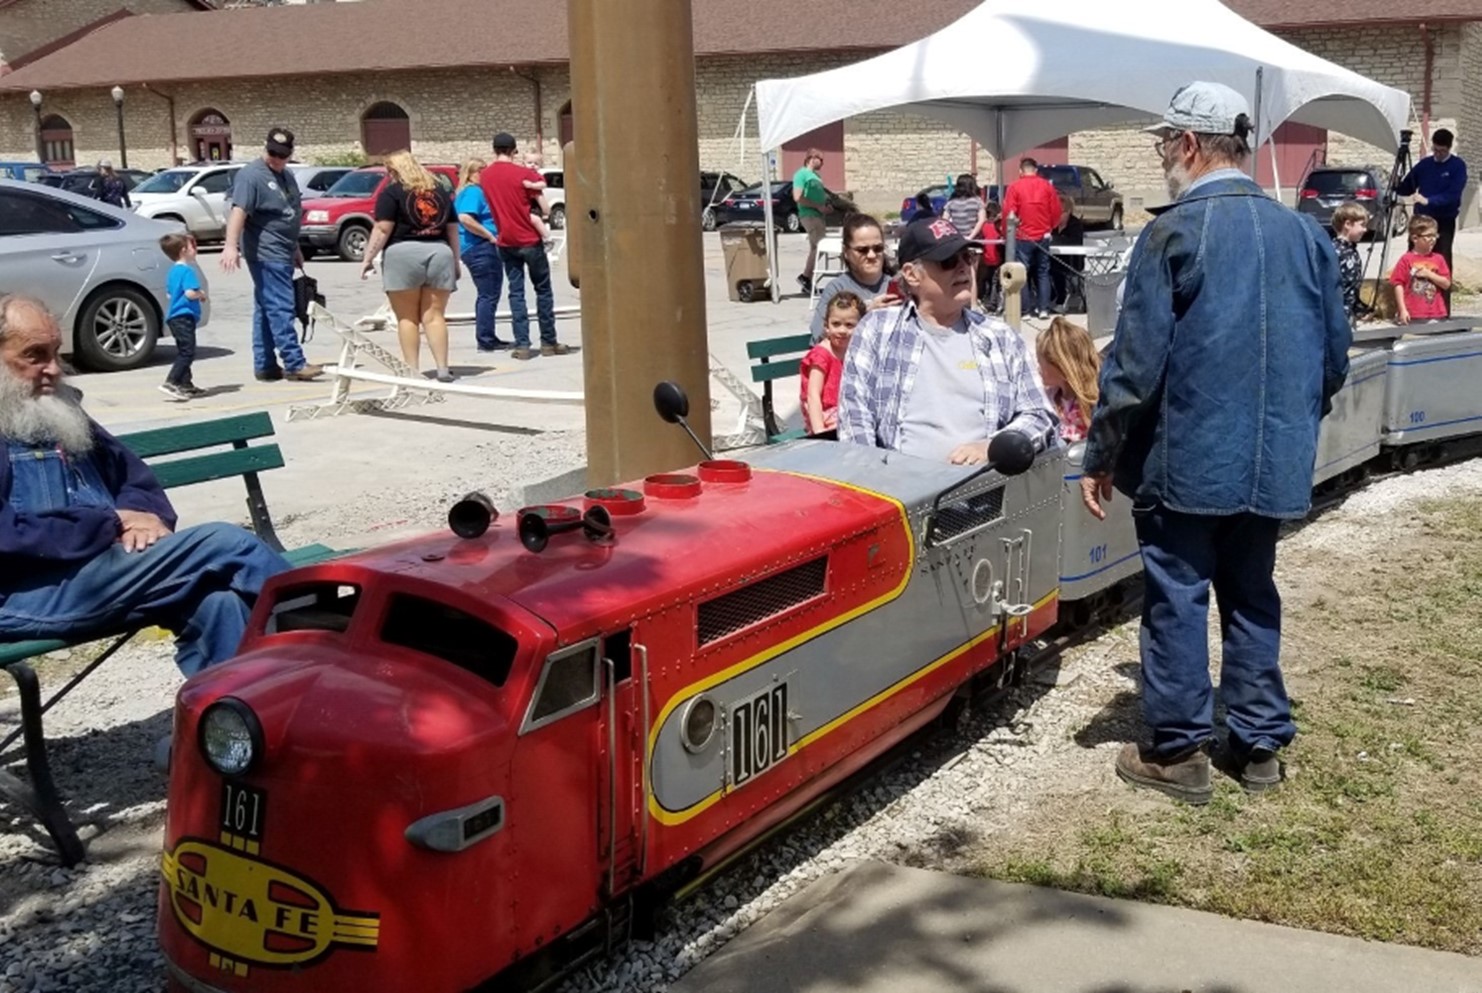 The Little Train is a perfect place to bring train lovers of all ages!